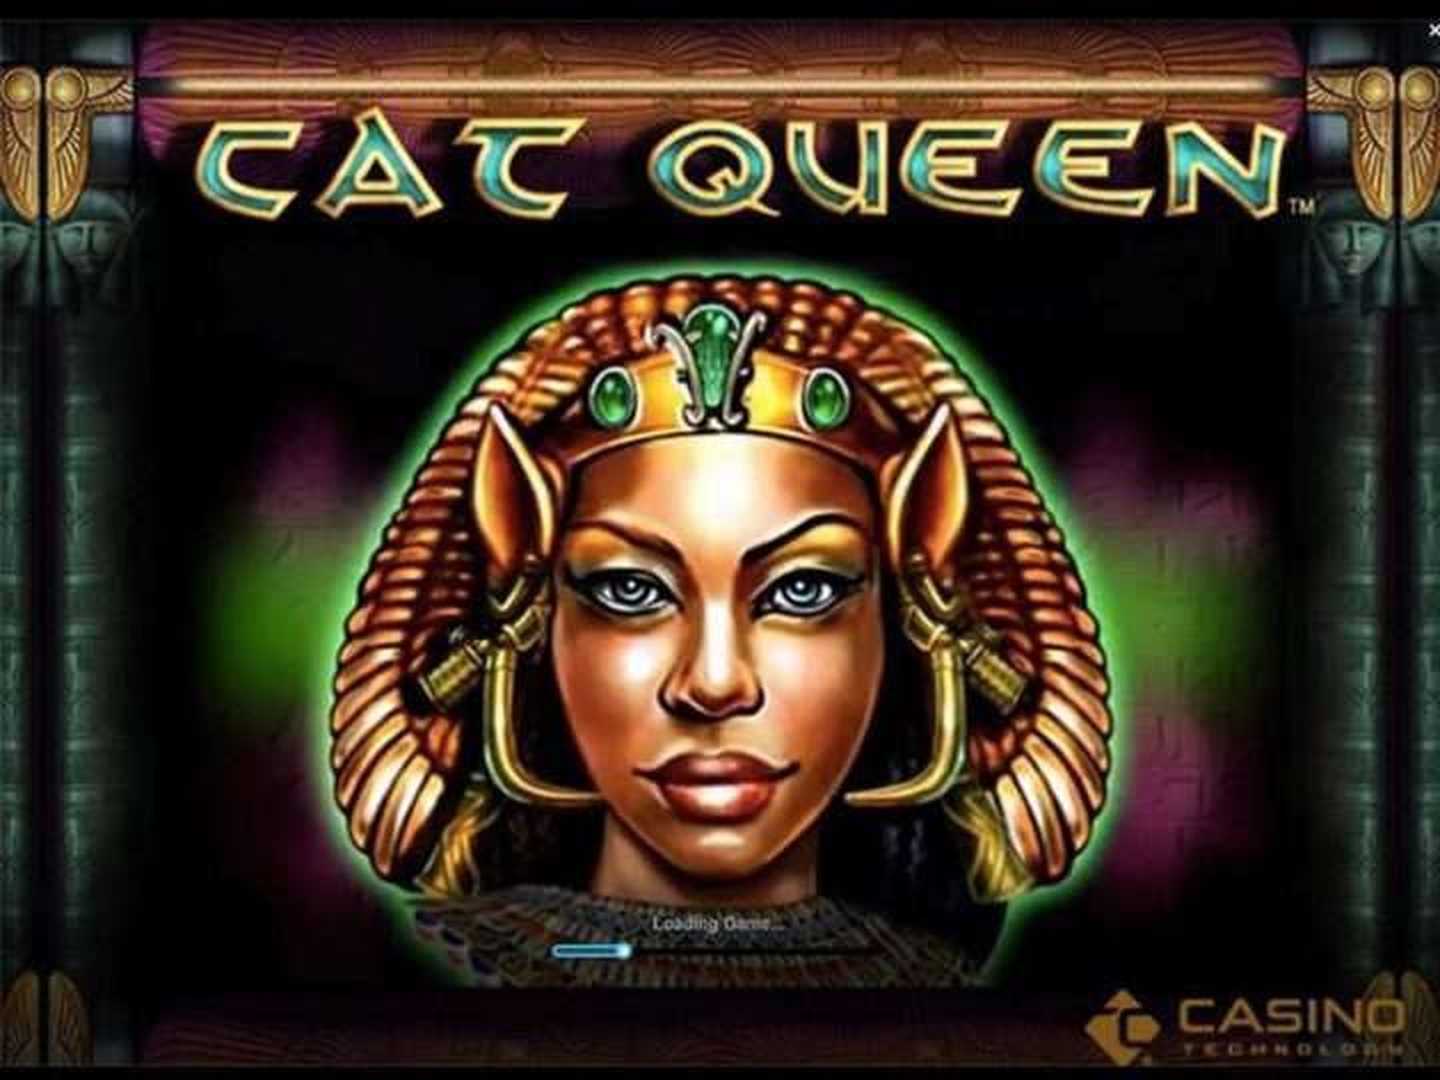 The Cat Queen Online Slot Demo Game by casino technology